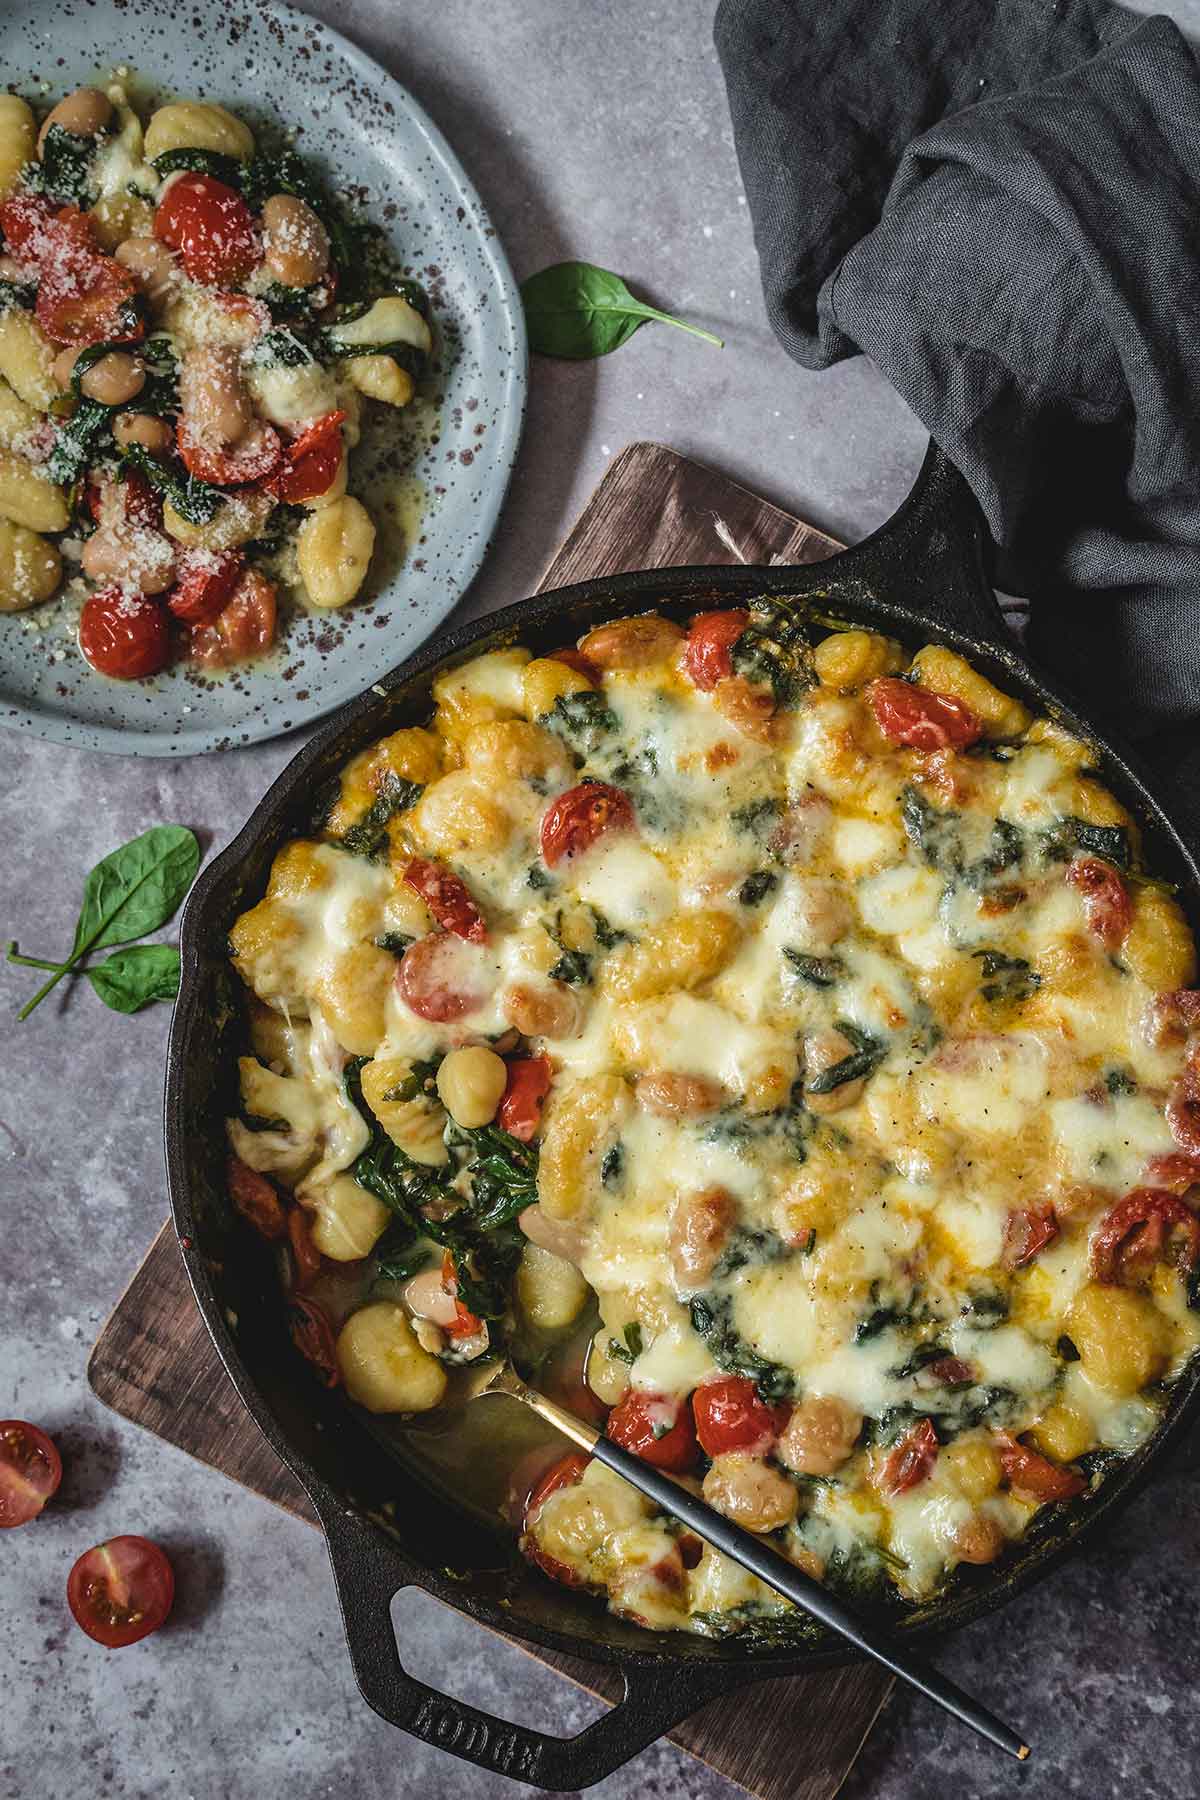 Baked Gnocchi with Spinach, Tomatoes, and Beans